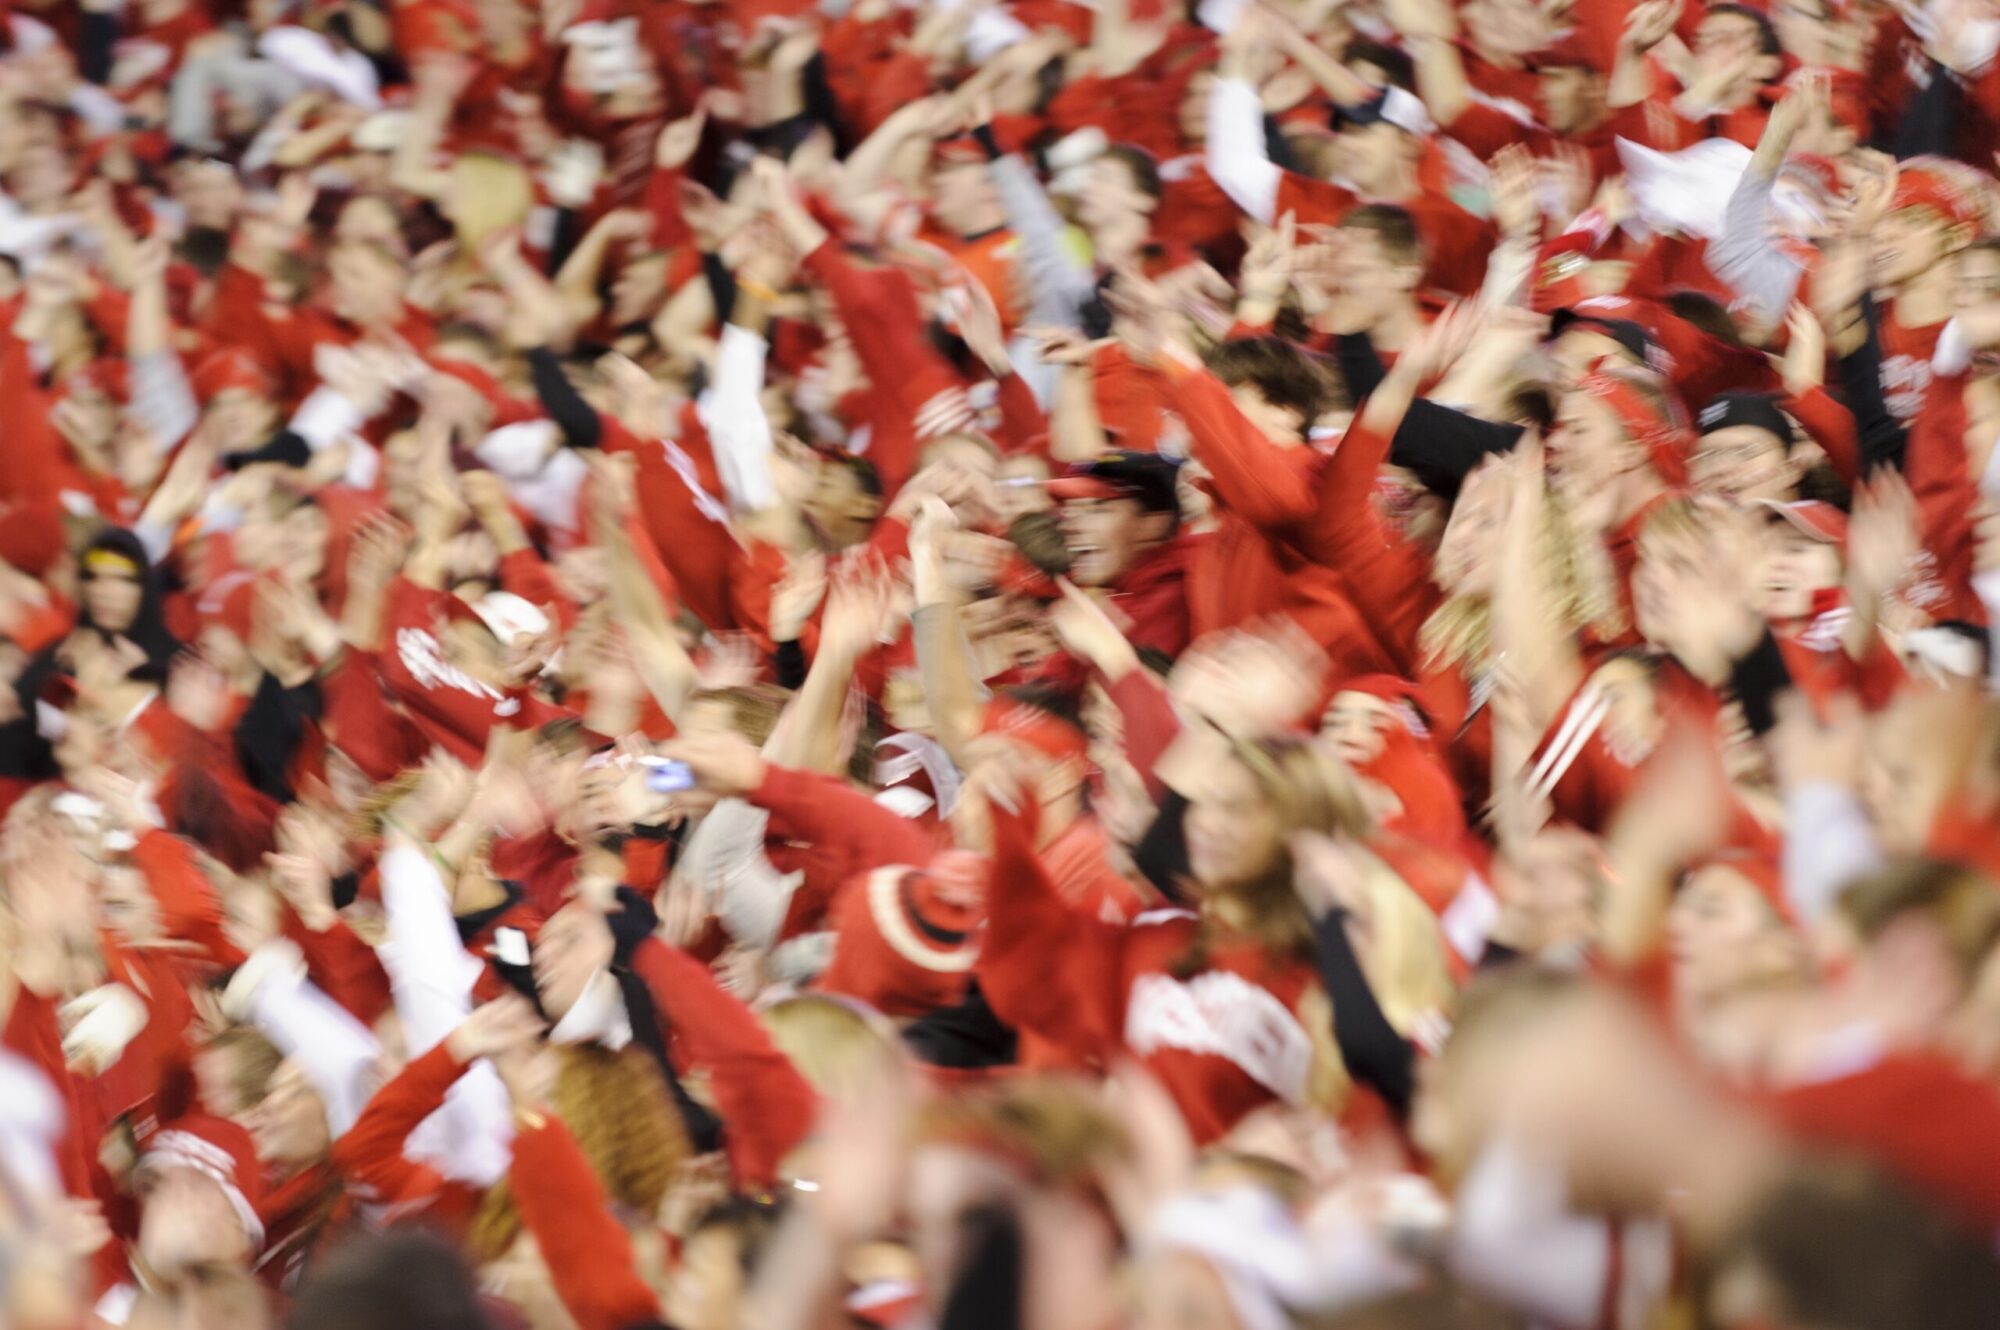 Badger football fans dressed in red cheering and jumping around with hands in air at Camp Randall Stadium.